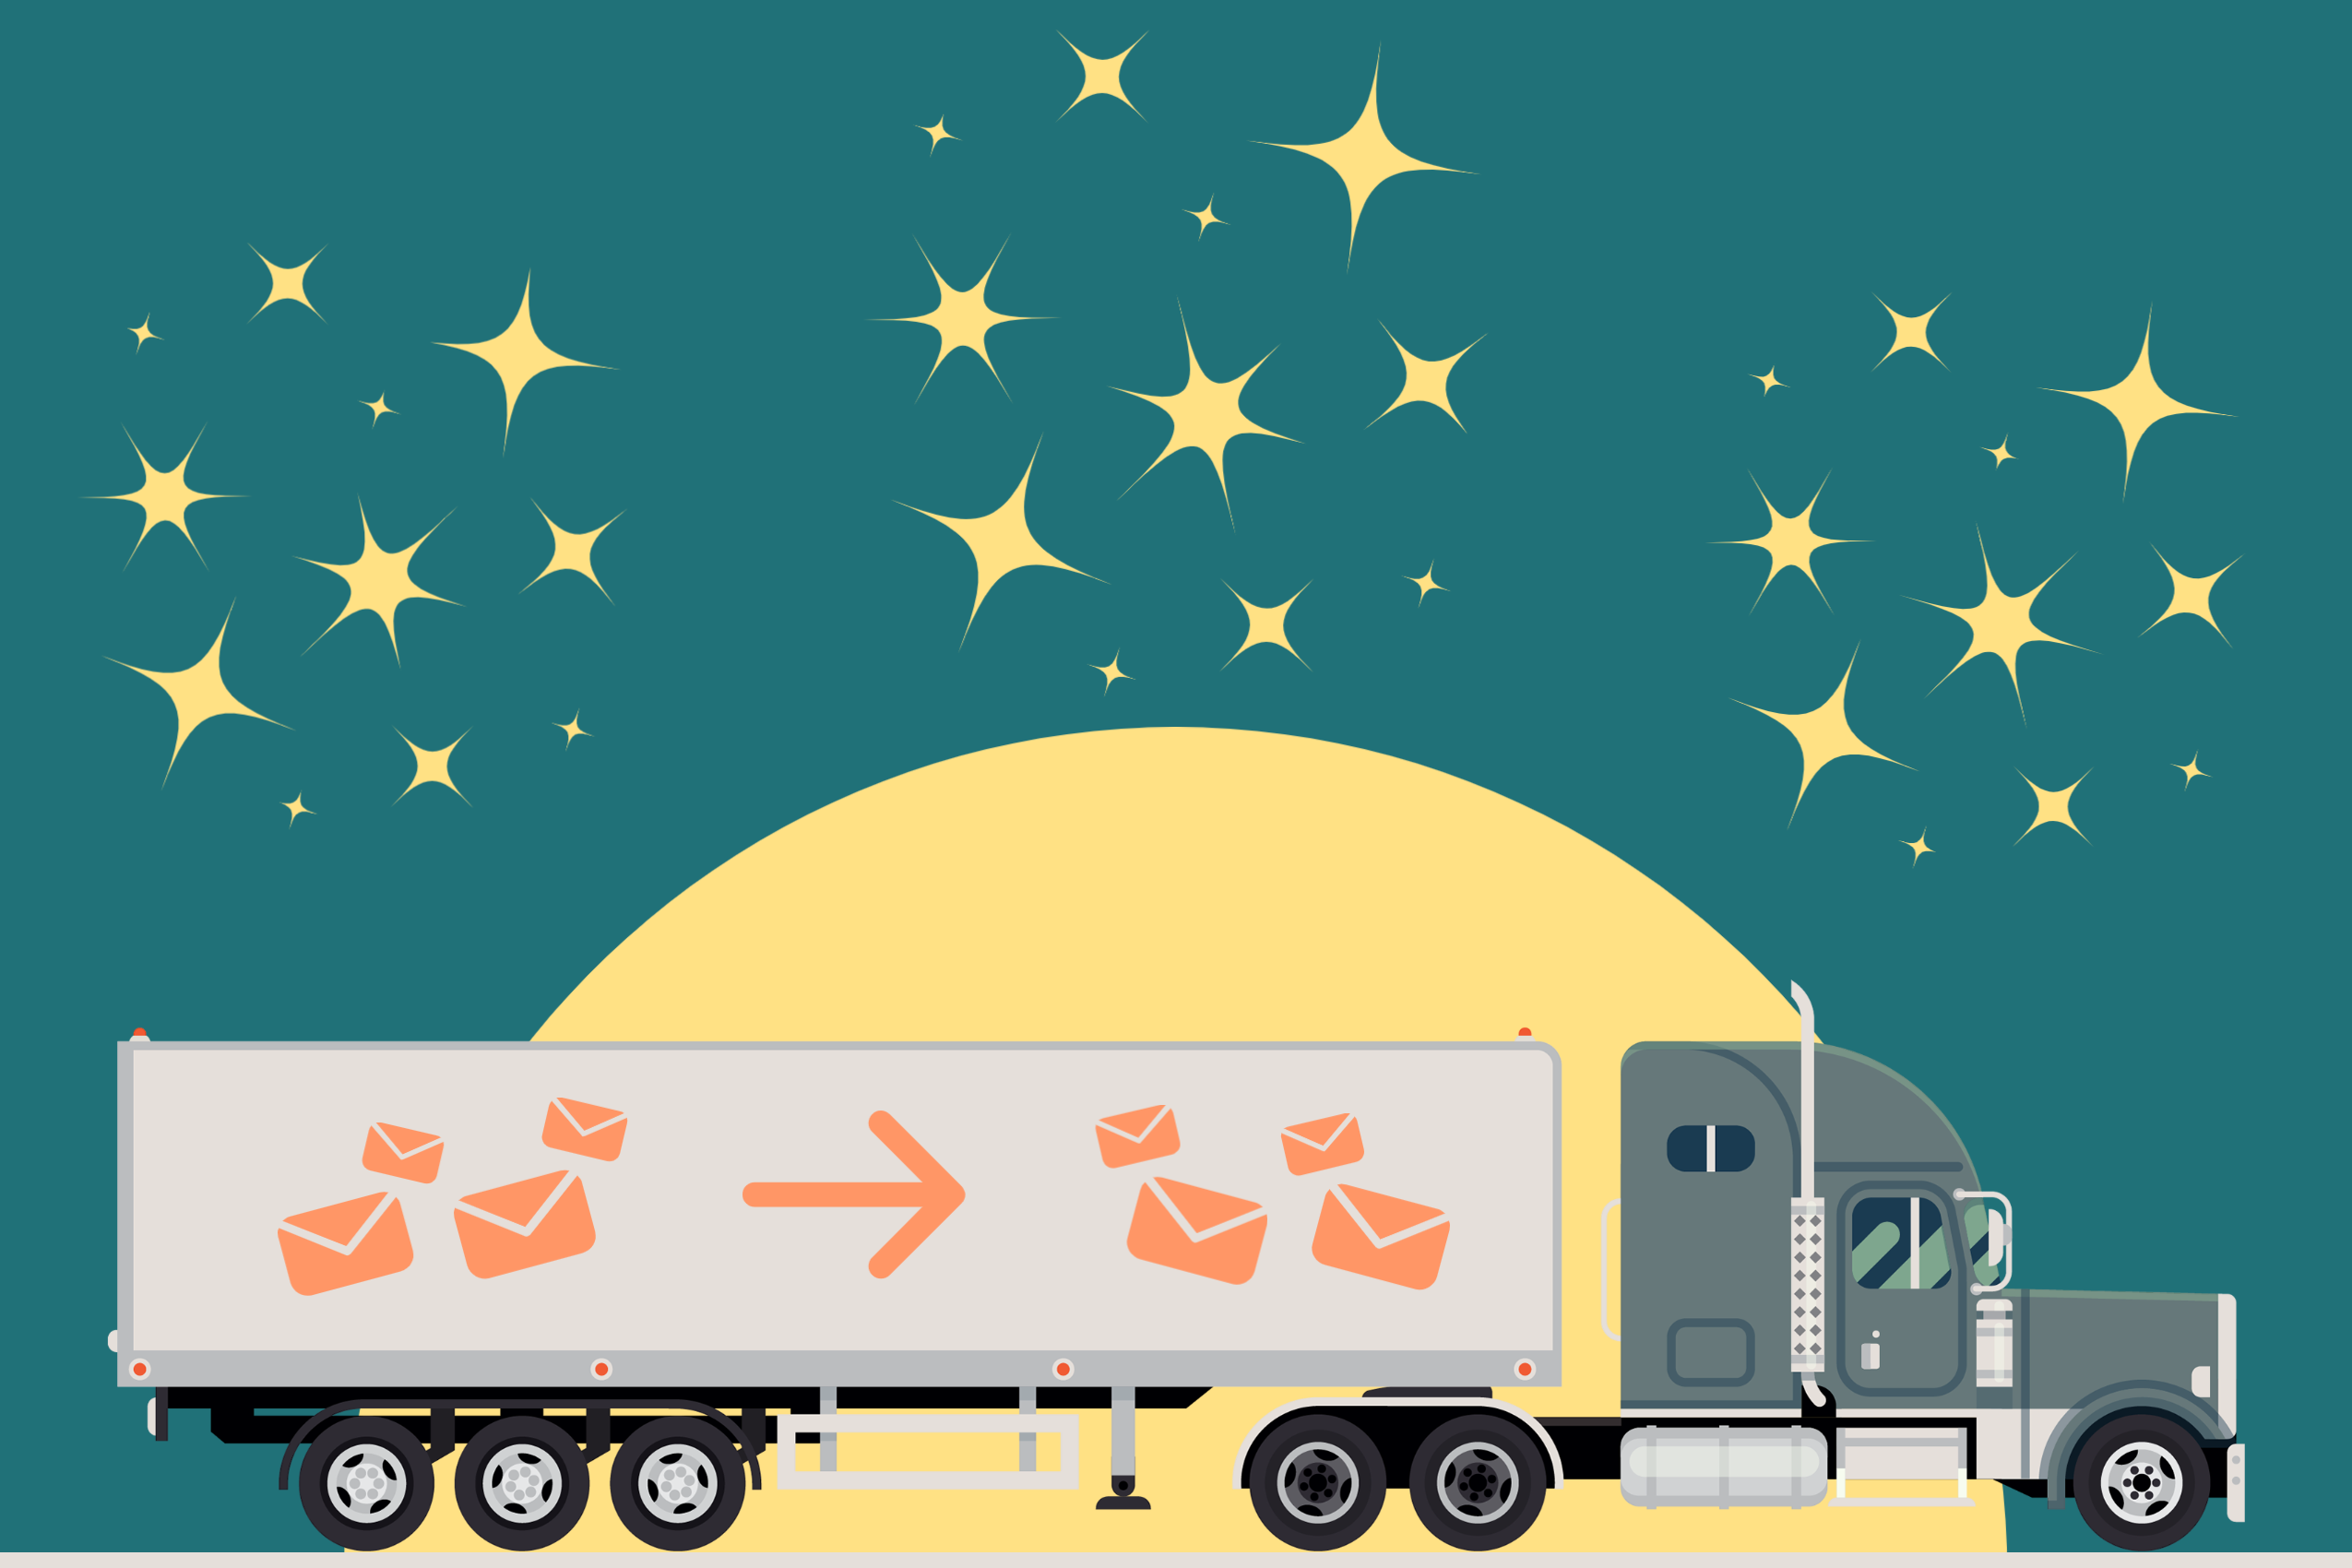 Graphic of an 18-wheeler truck with email logos on the side driving through the night with stars and a full moon in the background.